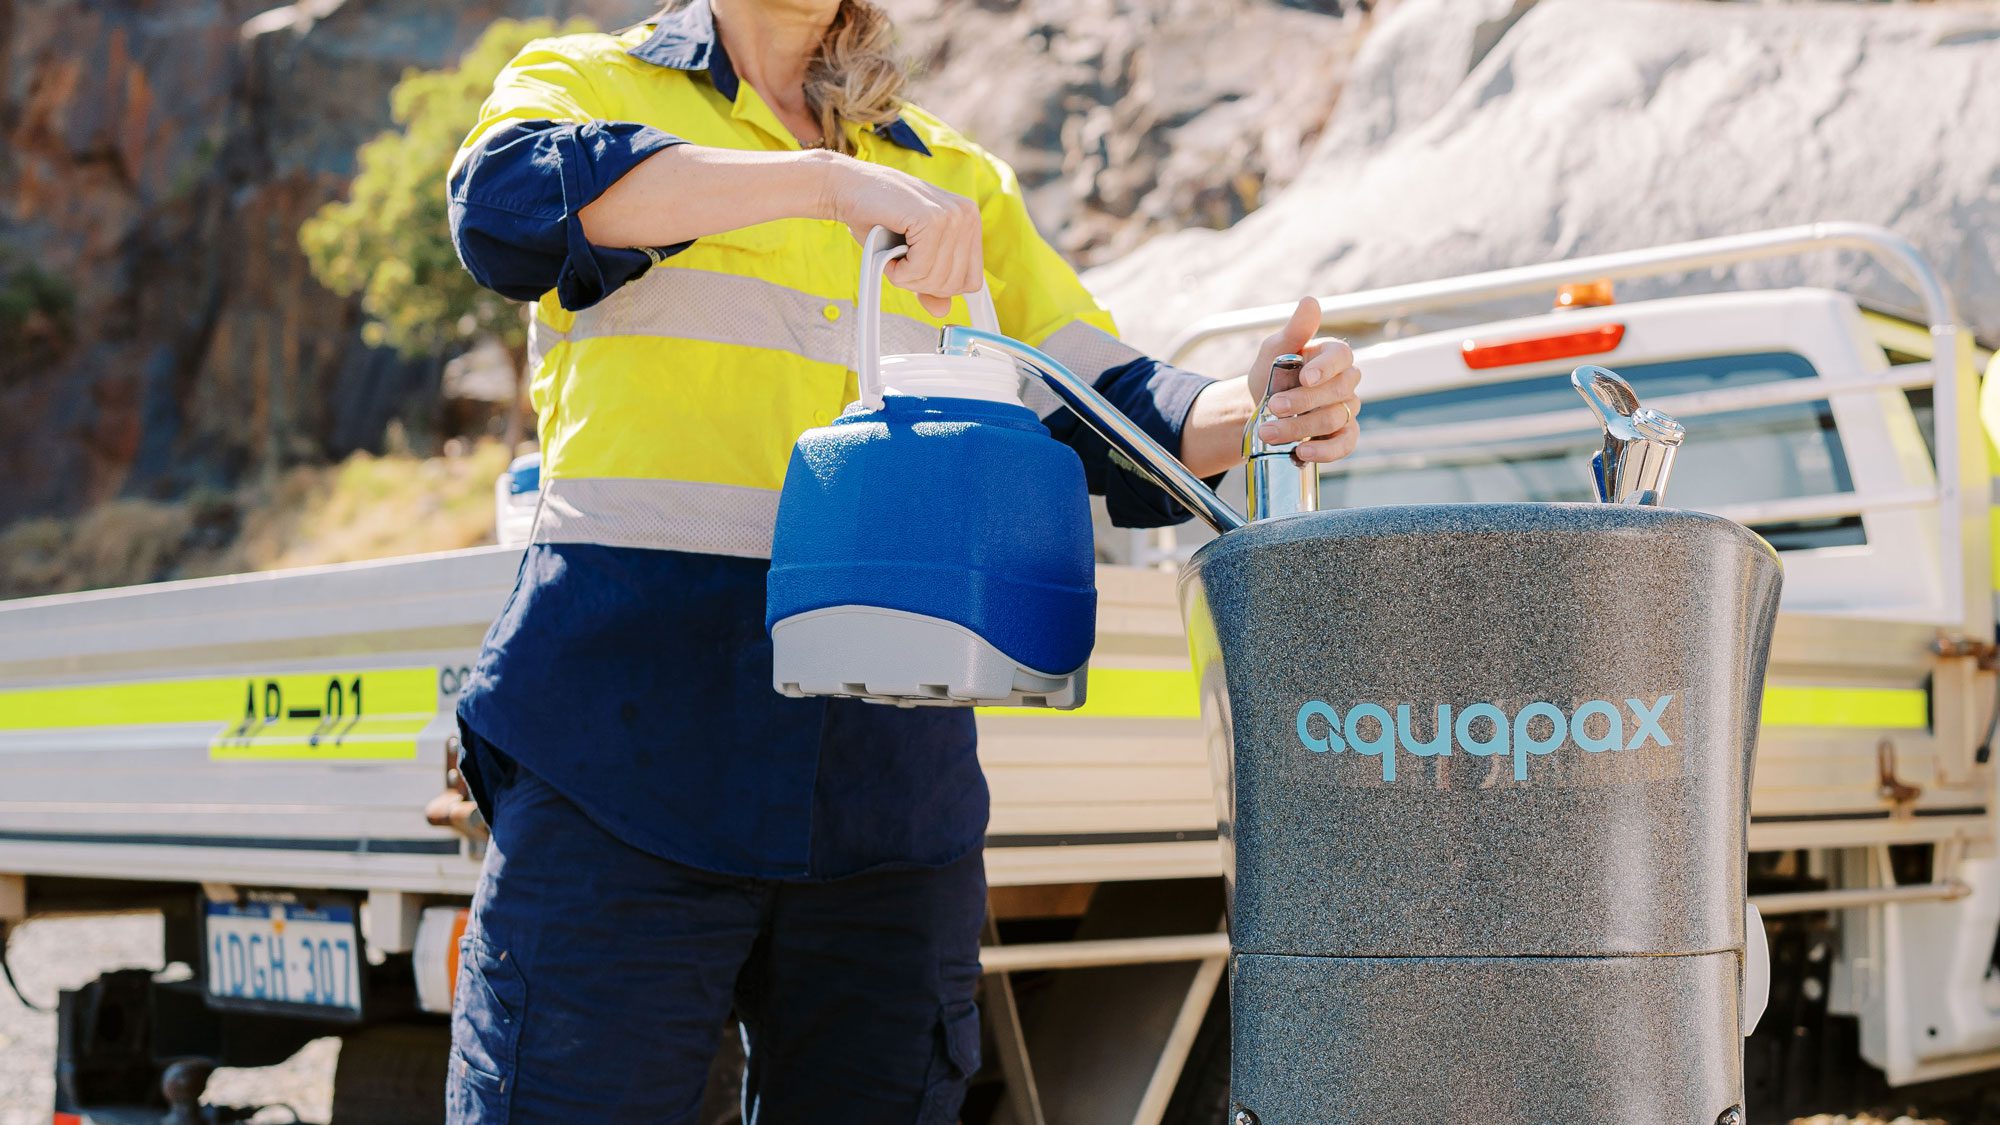 A construction worker filling up a water jug from an Aquapax water dispenser